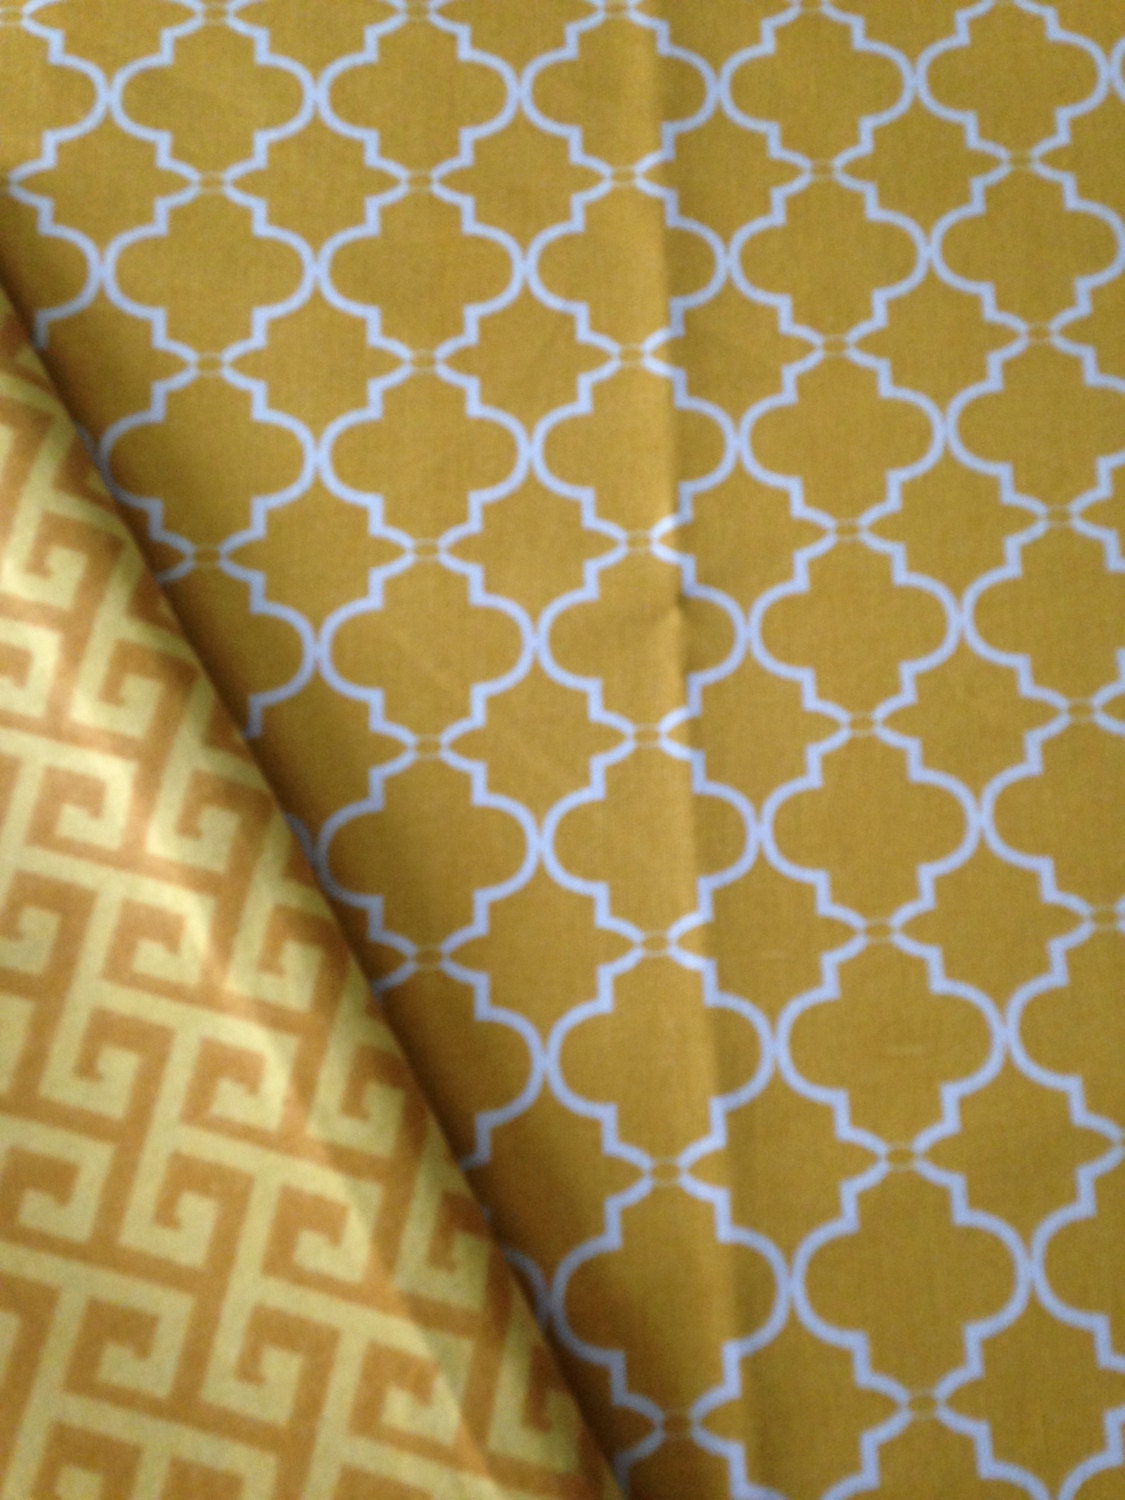 Washable Weighted Yellow Moroccan Lap Pad/Small Blanket/Travel Weighted